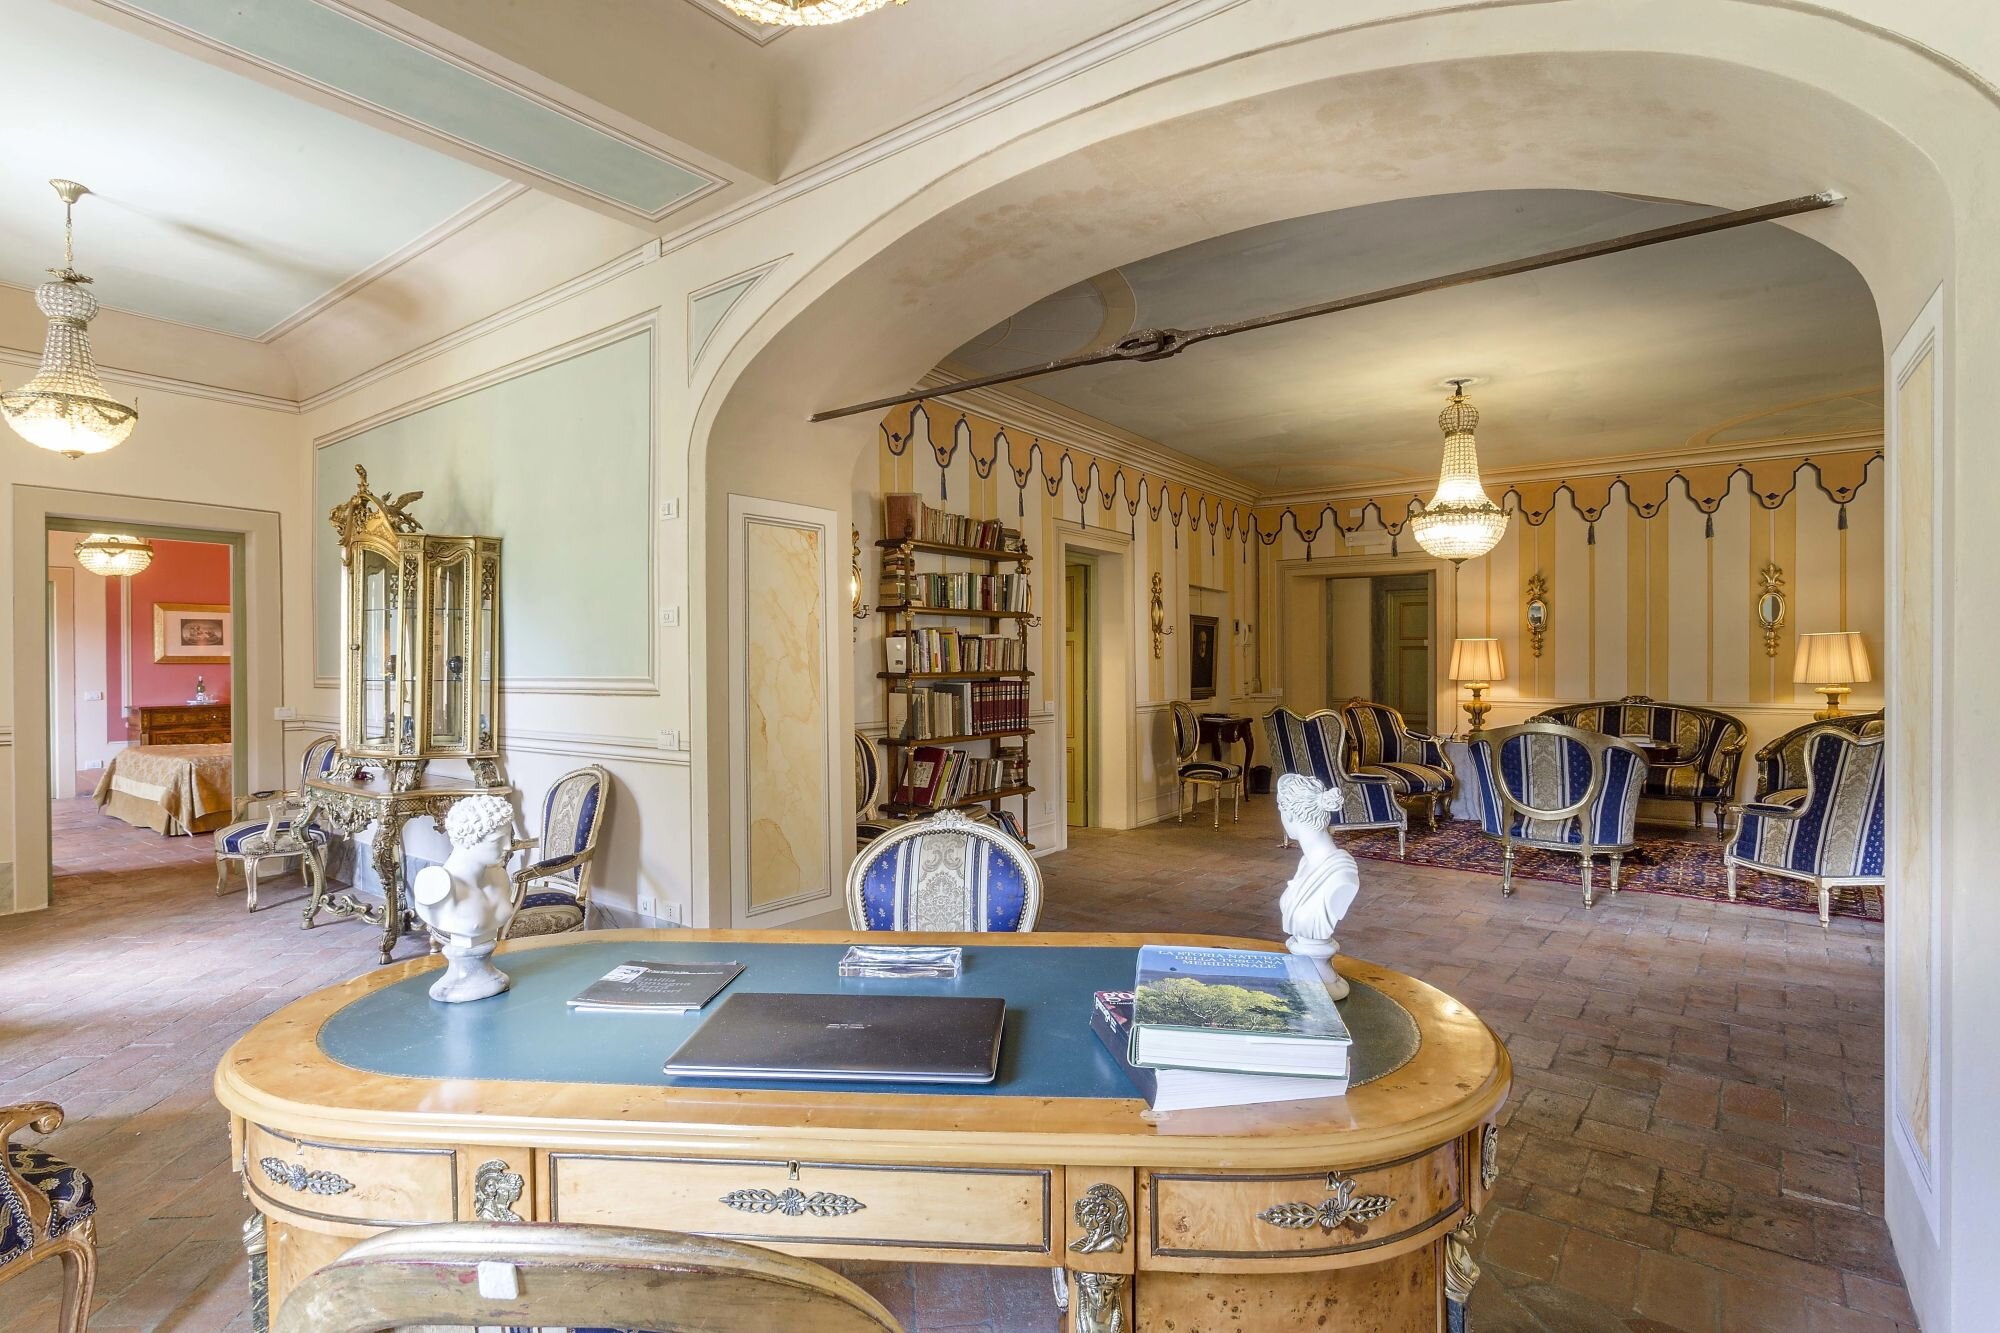 Francis York A Portfolio of Luxury Tuscan Villa Rentals is Coming to Auction22.jpeg